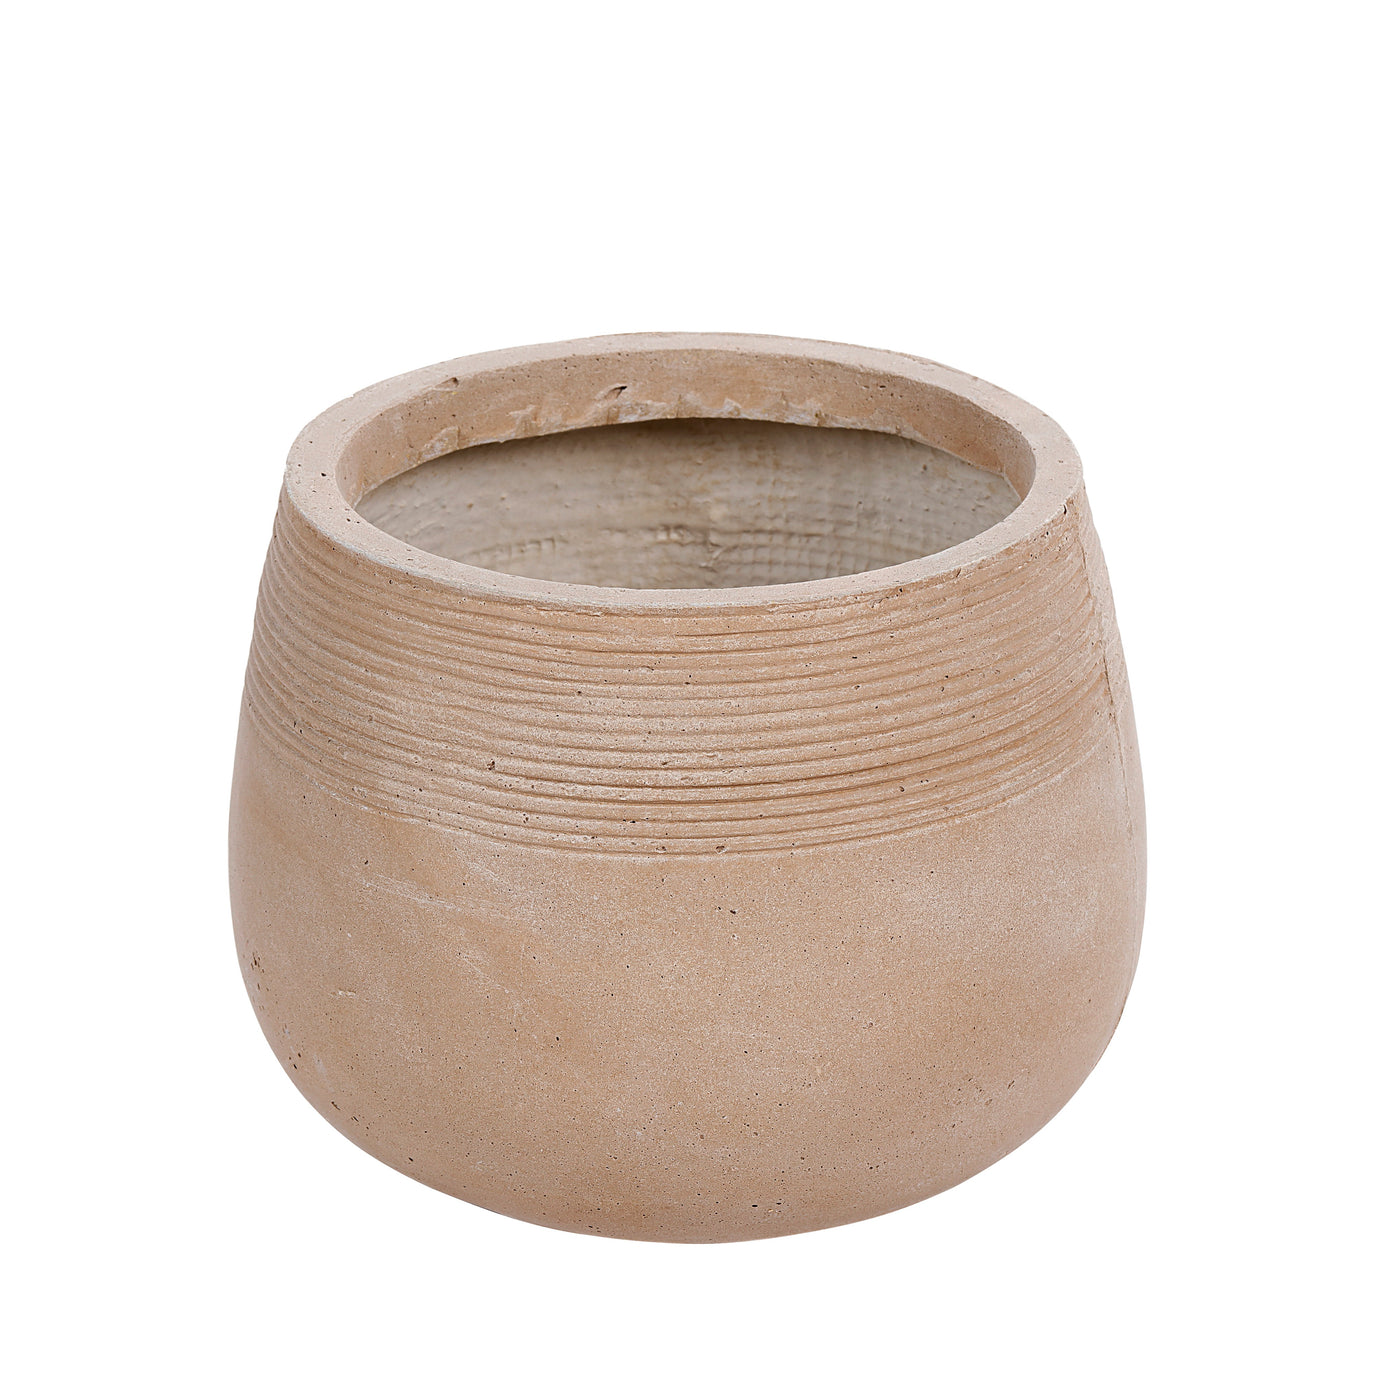 Contemporary stonecast planter in natural taupe